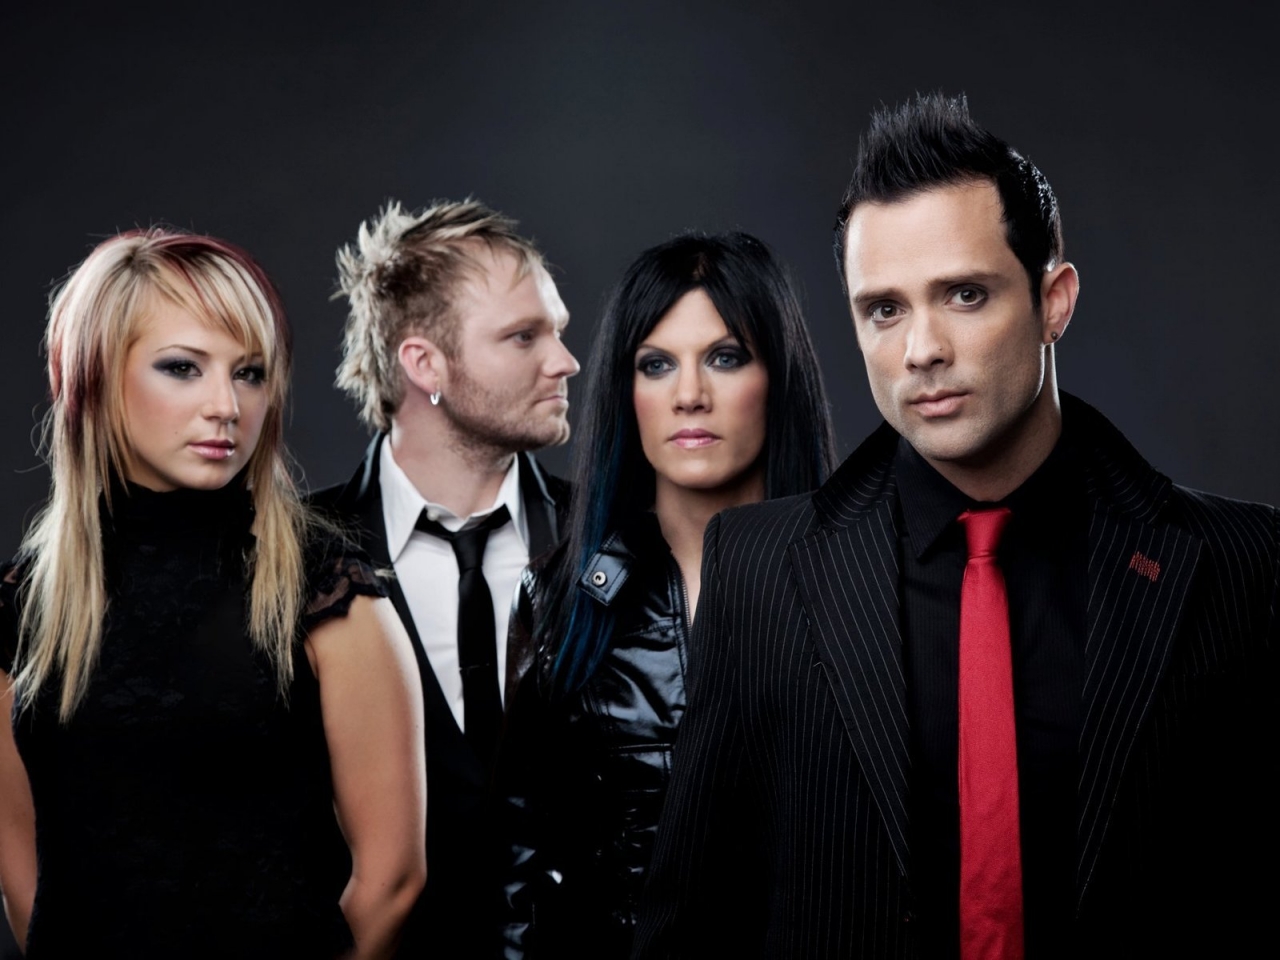 Skillet Band Members for 1280 x 960 resolution